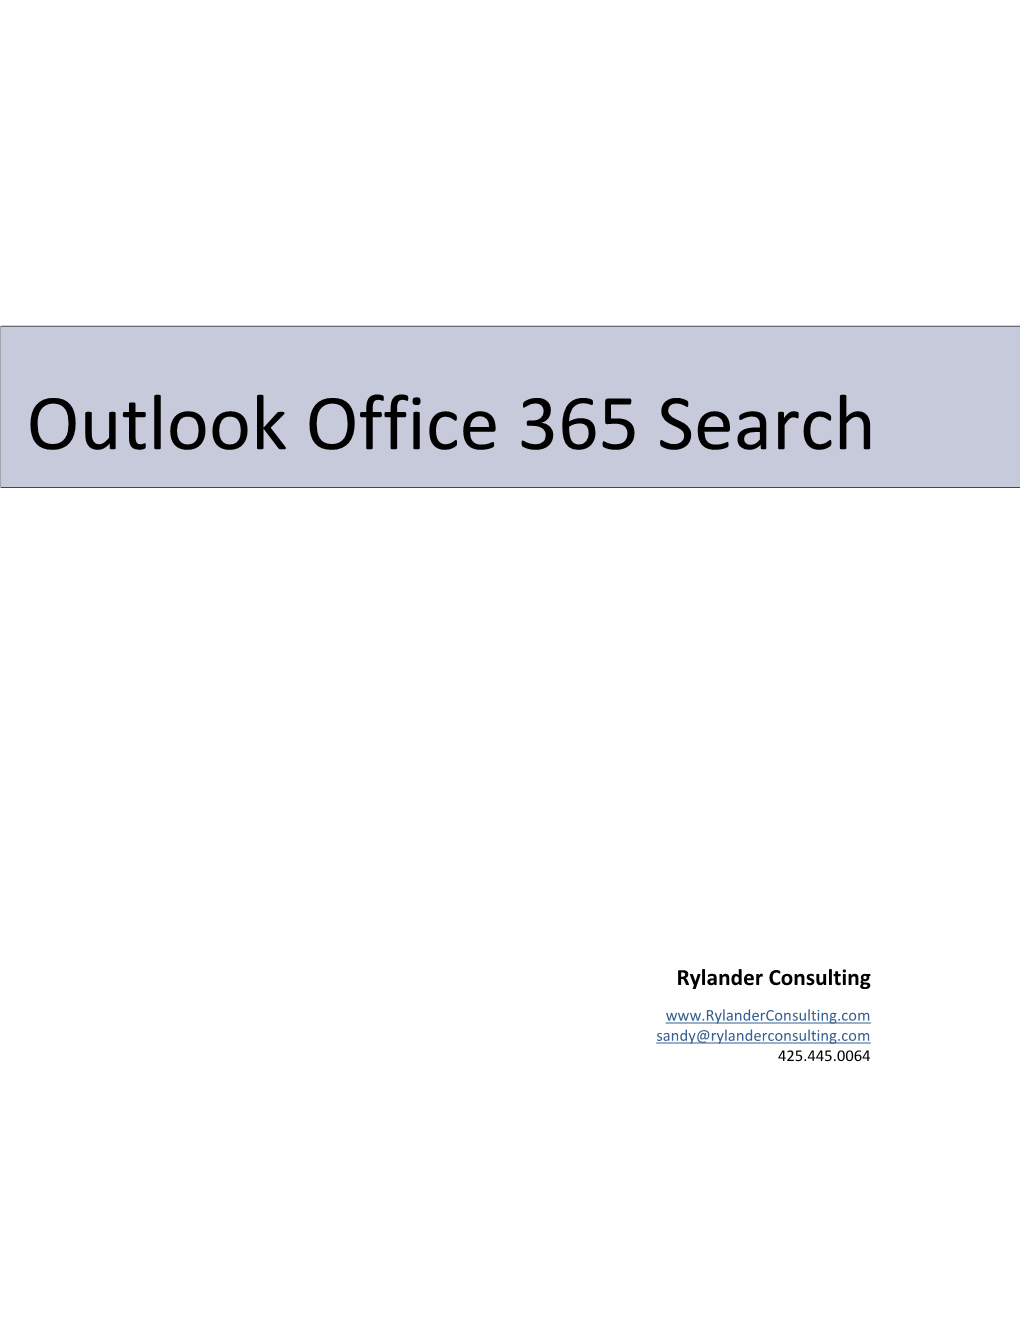 Outlook Office 365 Search Training